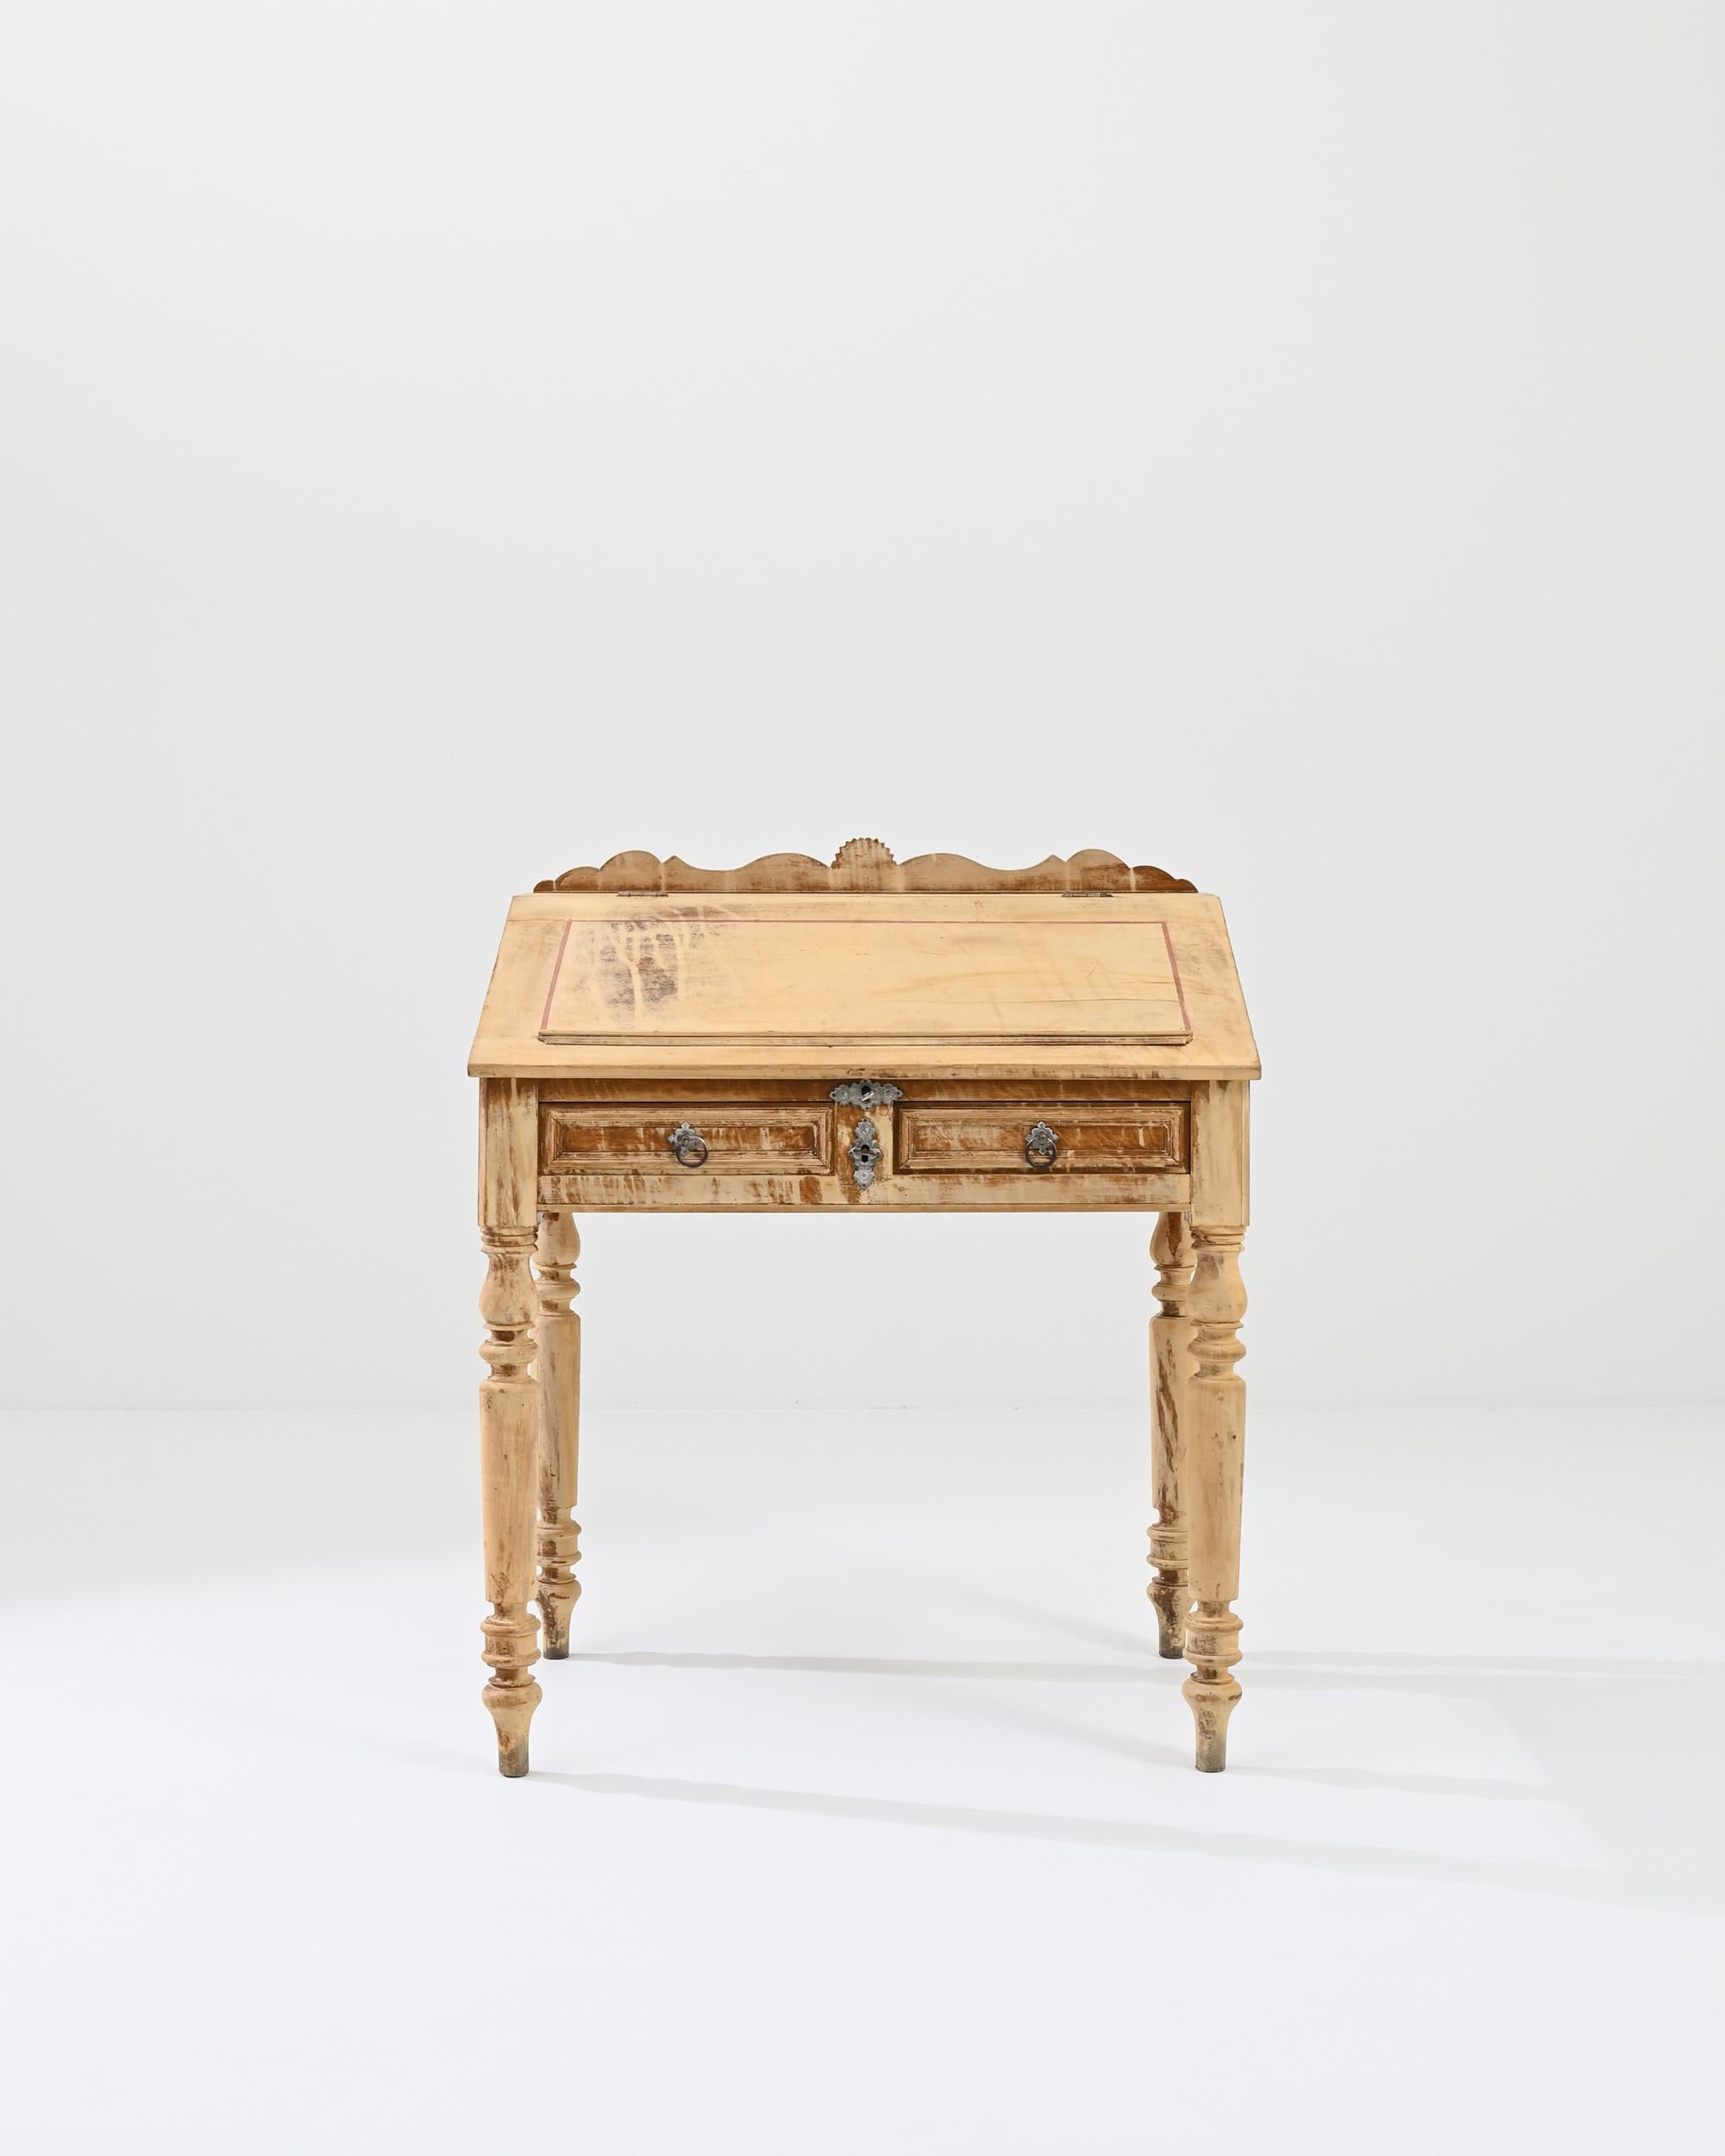 A wooden writing desk from 19th century France. The top of this desk opens up to reveal three storage compartments and a writing surface, below which sit two drawers. A sunny aura emits from the surface of this desk, a creamy peach colored patina